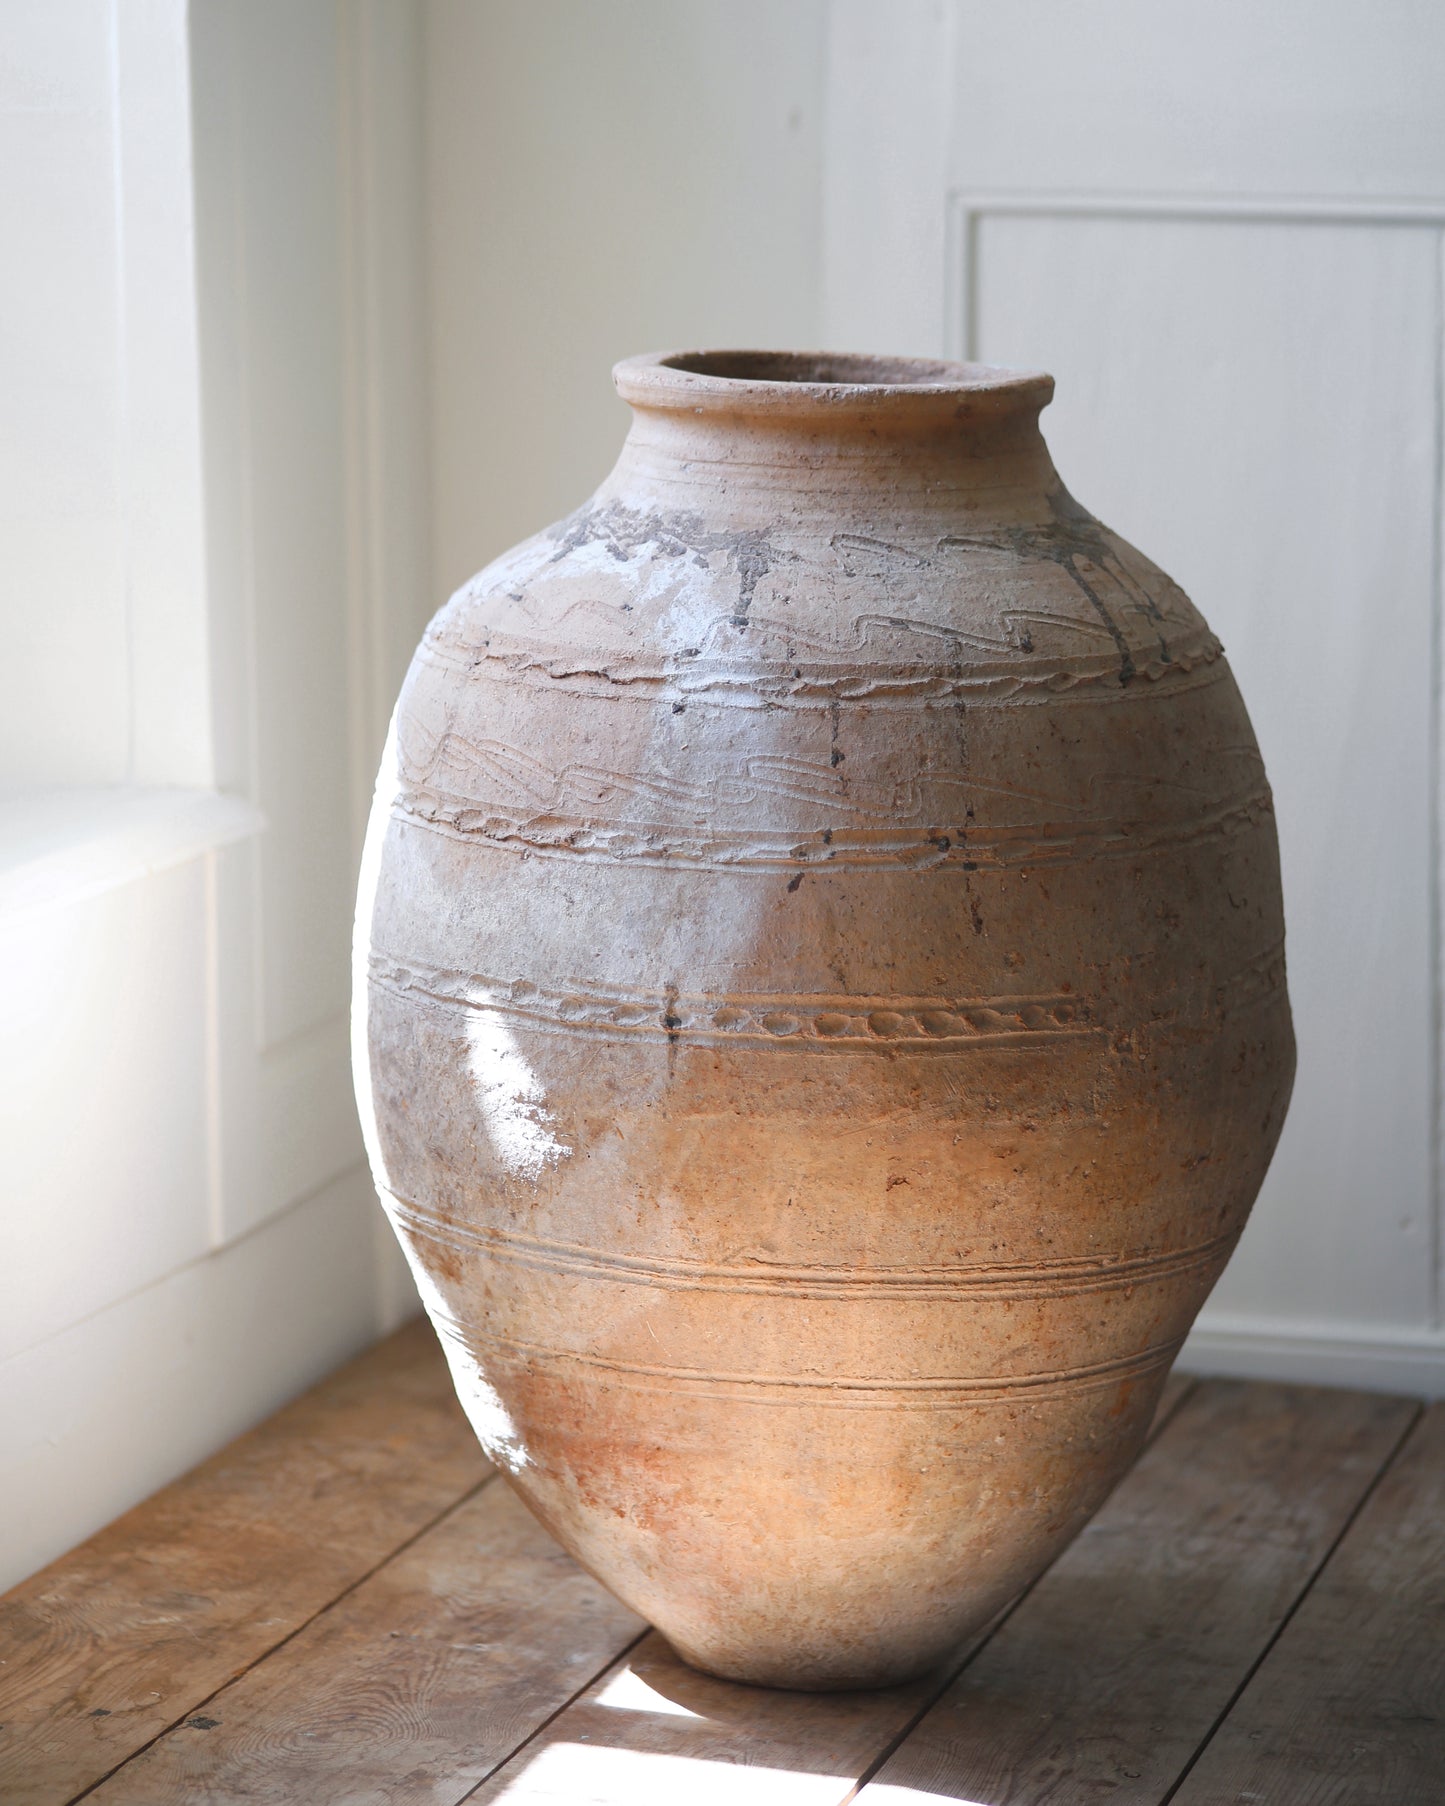 Naturally aged patina of old terracotta olive pot